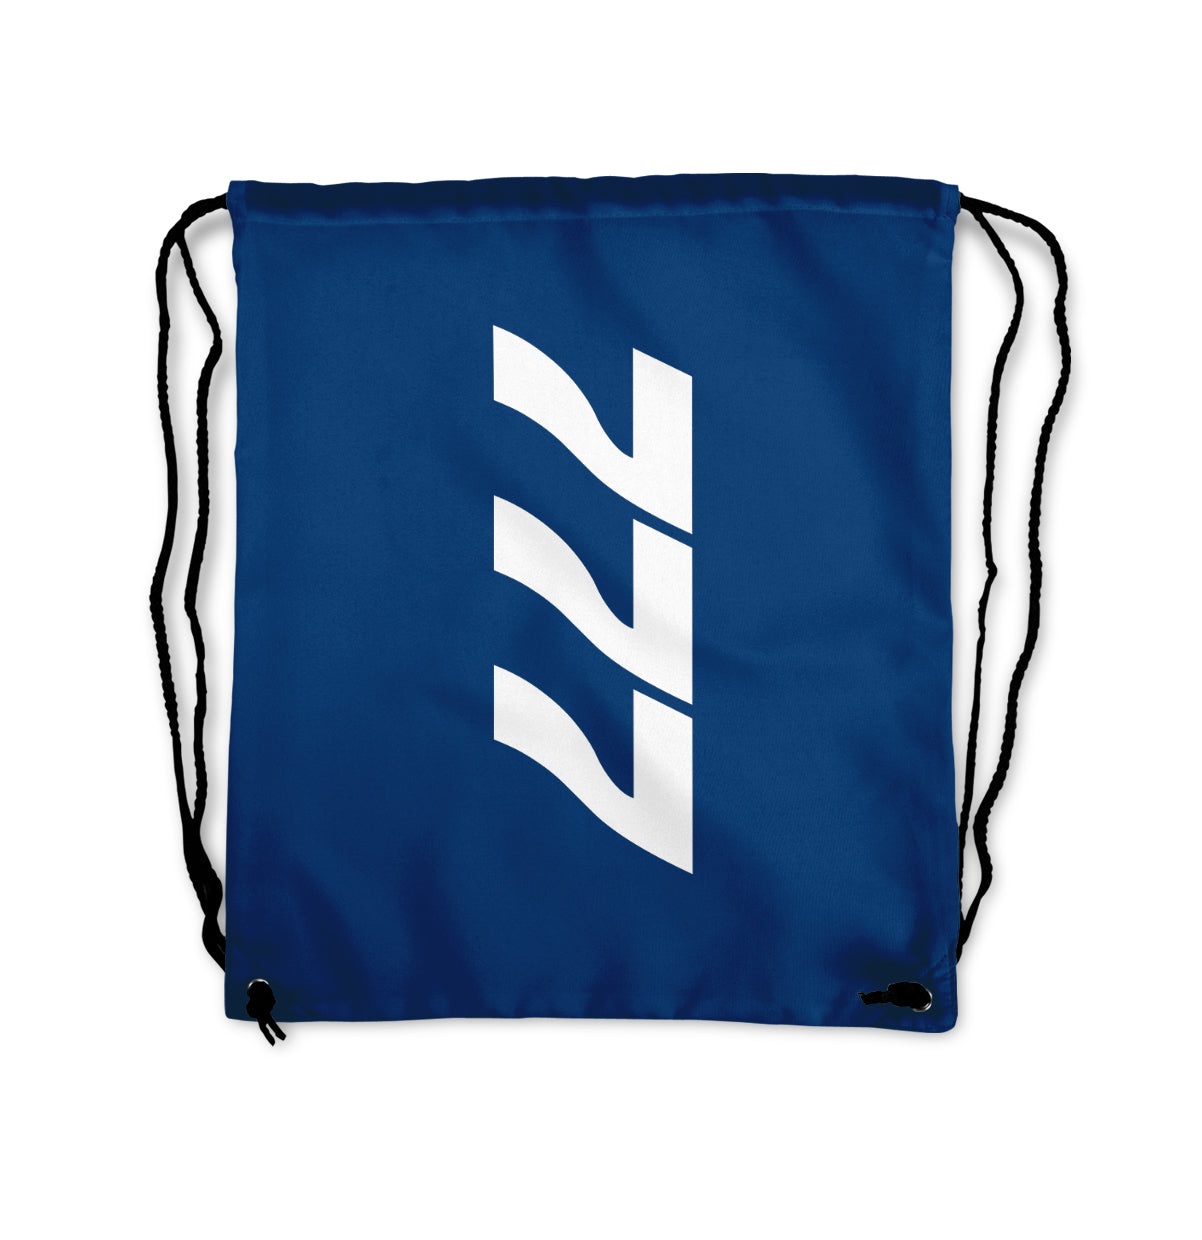 Boeing 777 Text Designed Drawstring Bags